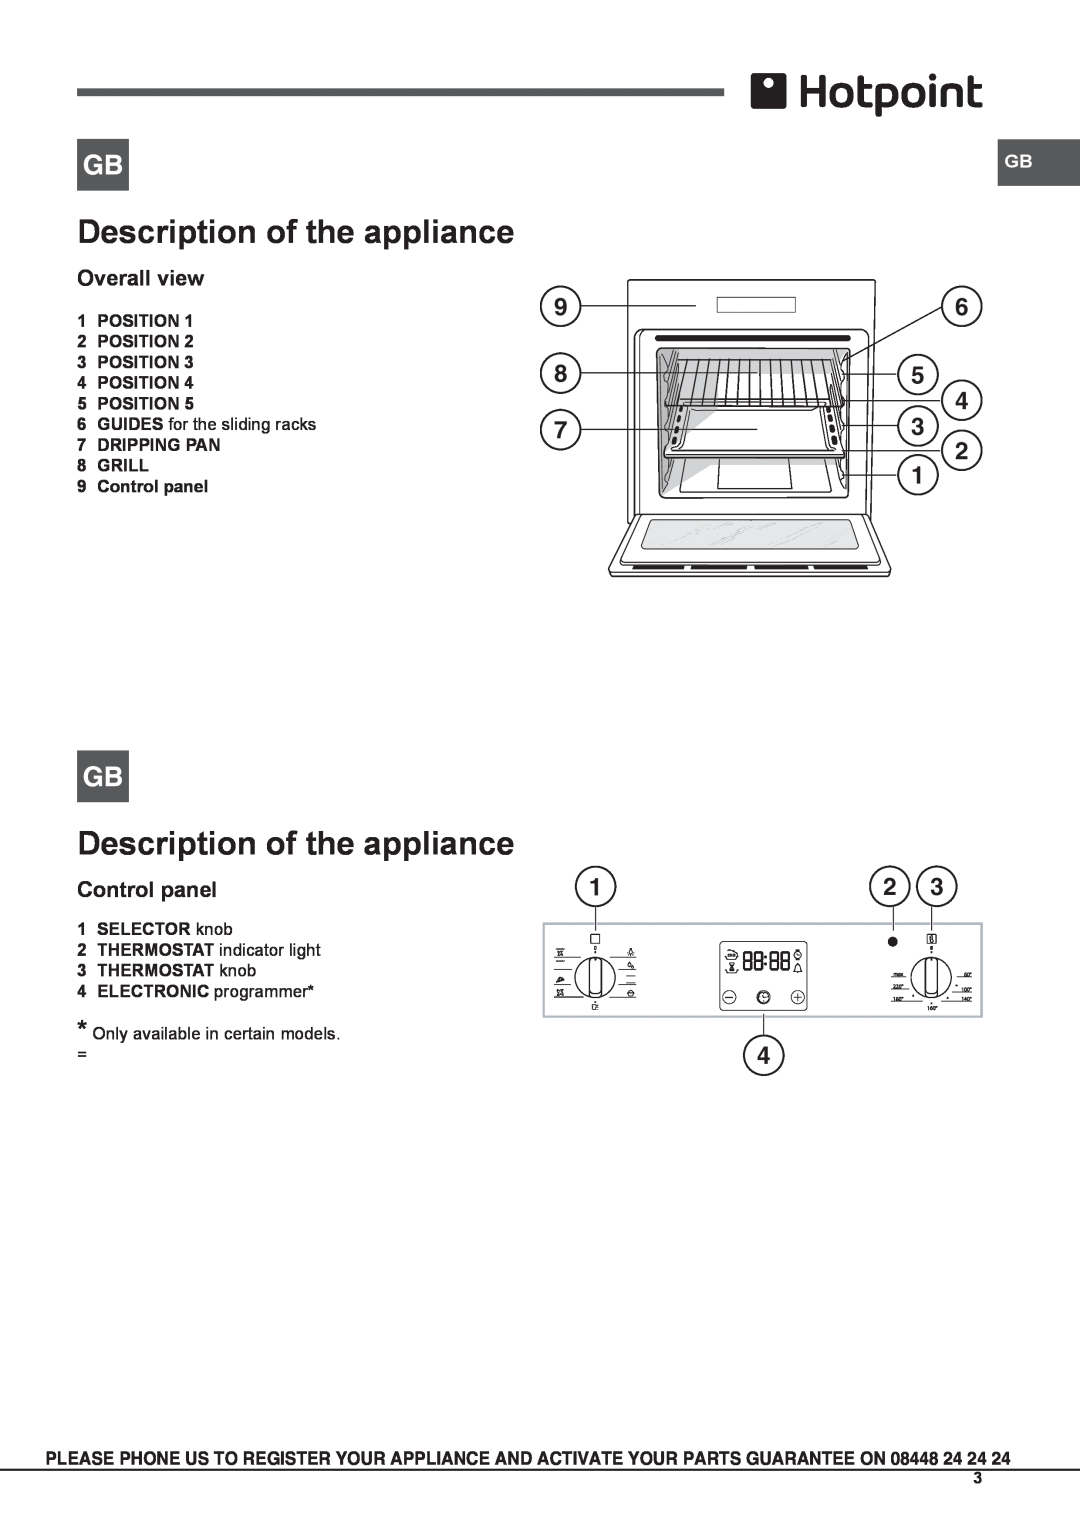 Hotpoint SCL 08 EB Description of the appliance, Overall view, DRIPPING PAN 8 GRILL 9 Control panel, SELECTOR knob 